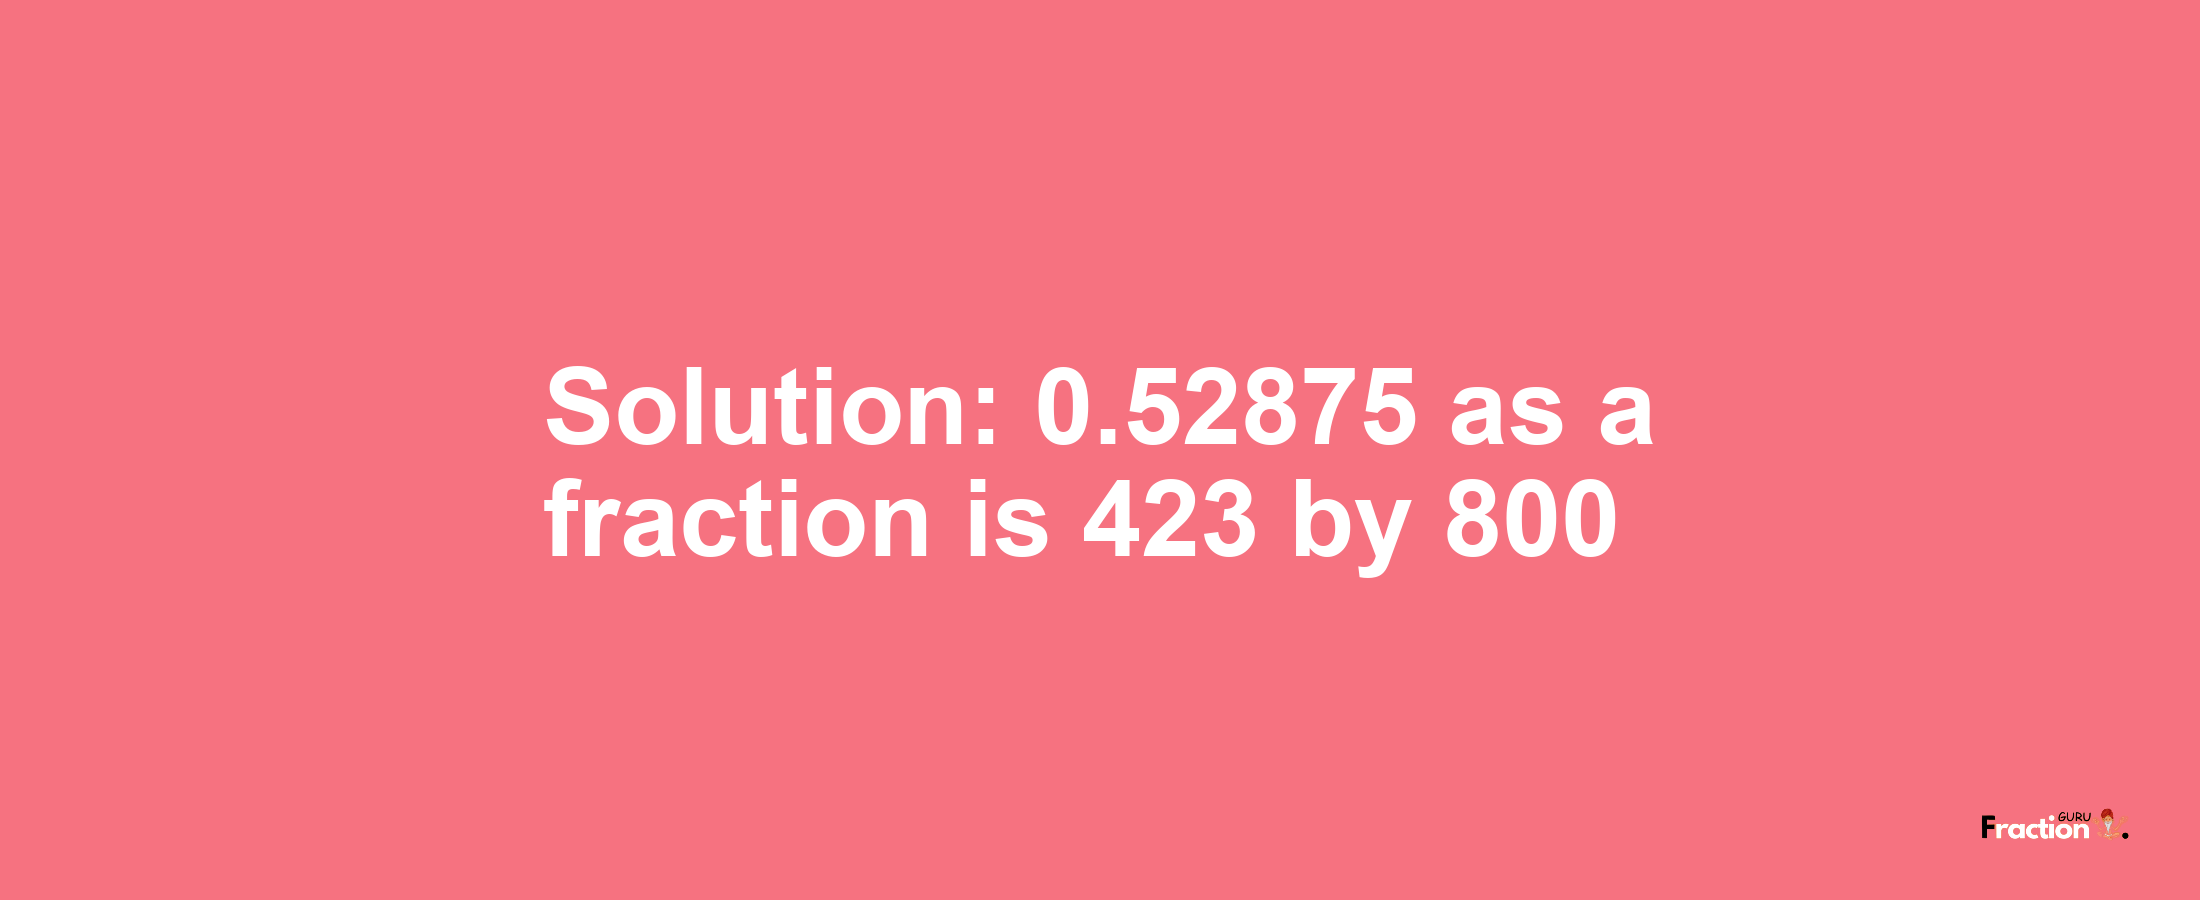 Solution:0.52875 as a fraction is 423/800